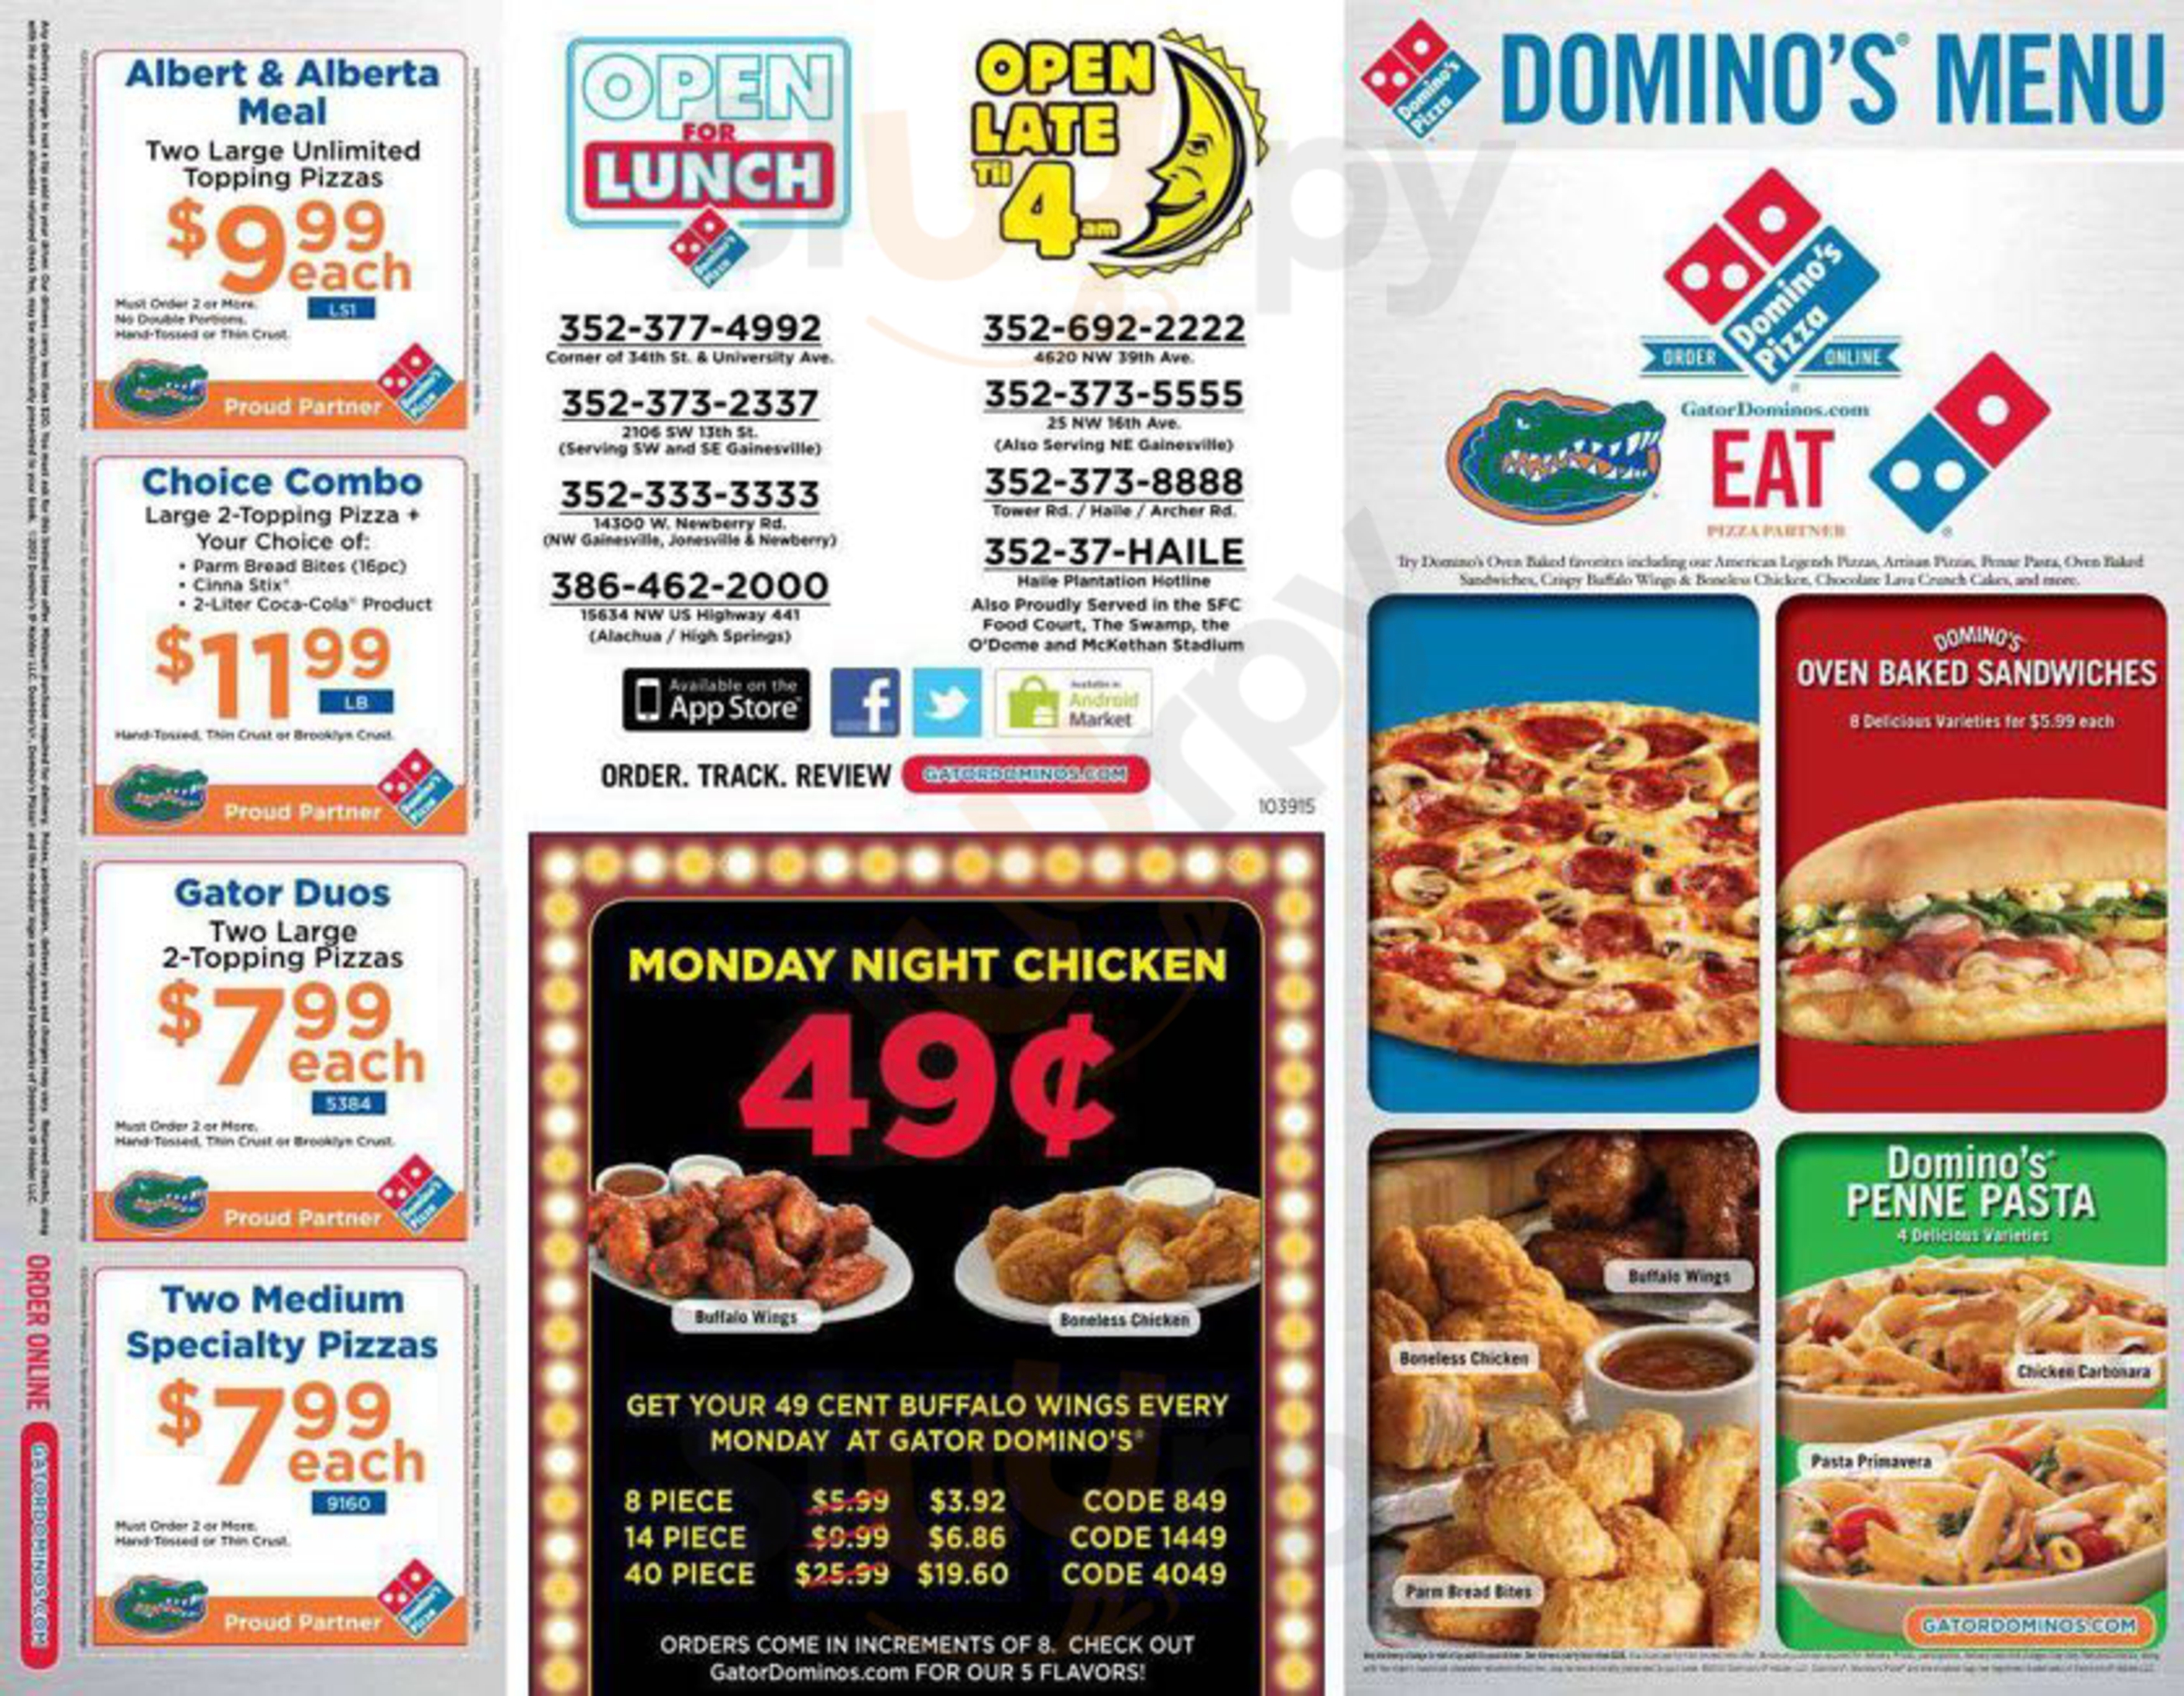 Domino's Pizza Clearwater Menu - 1